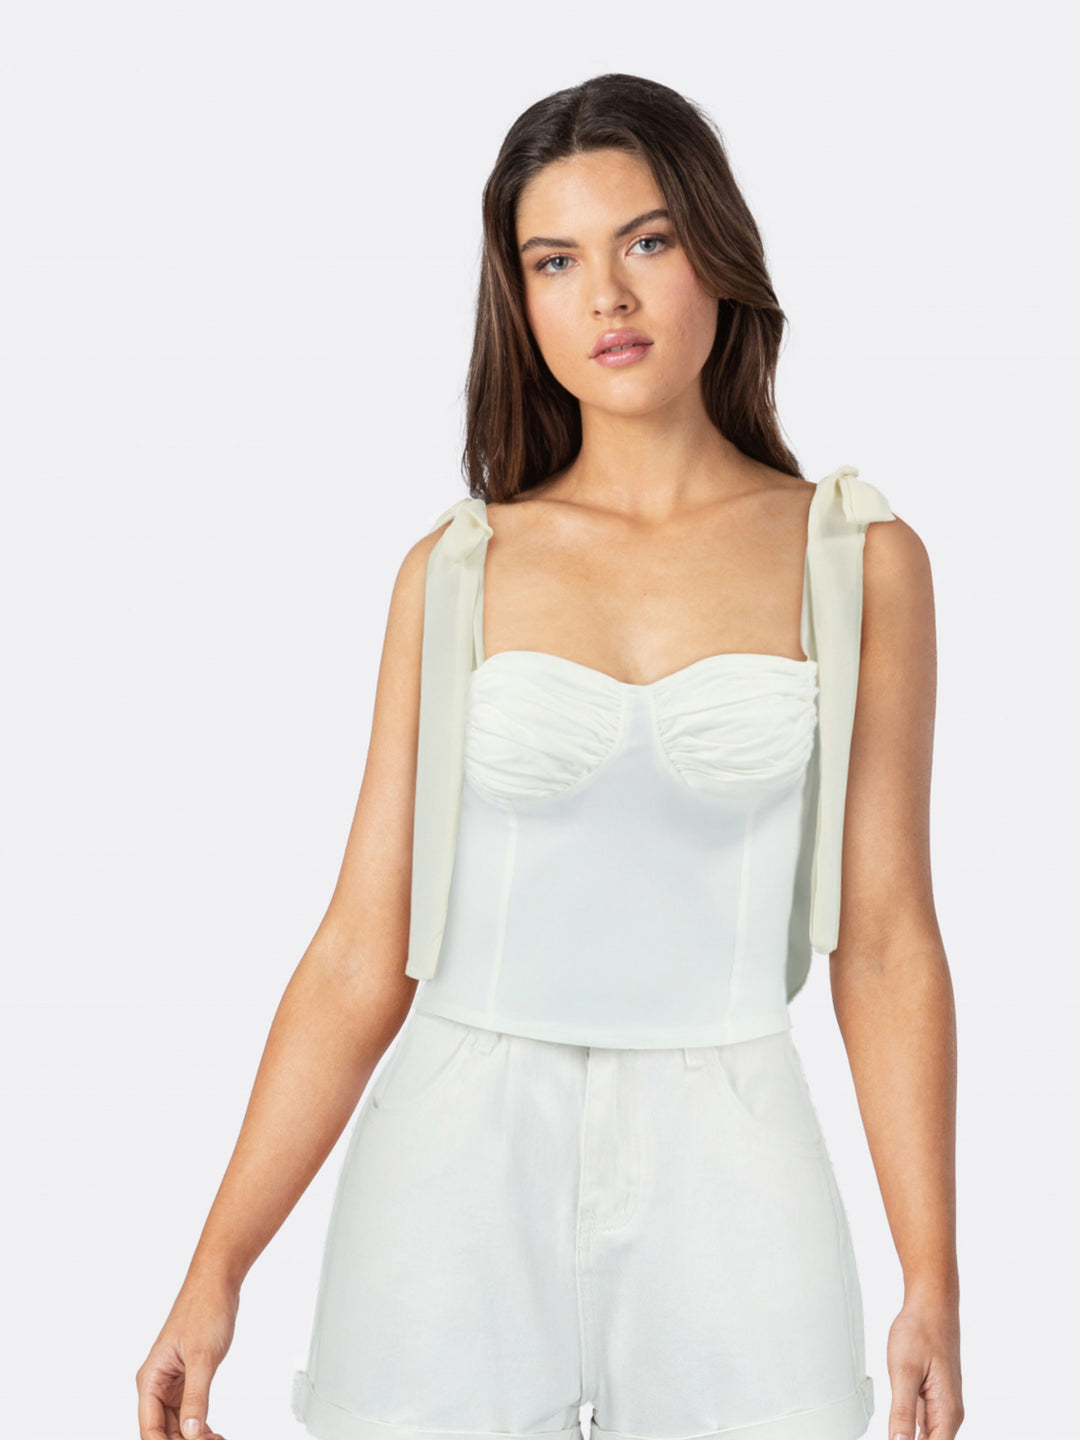 Bustier Top with Tie Straps White Front Close